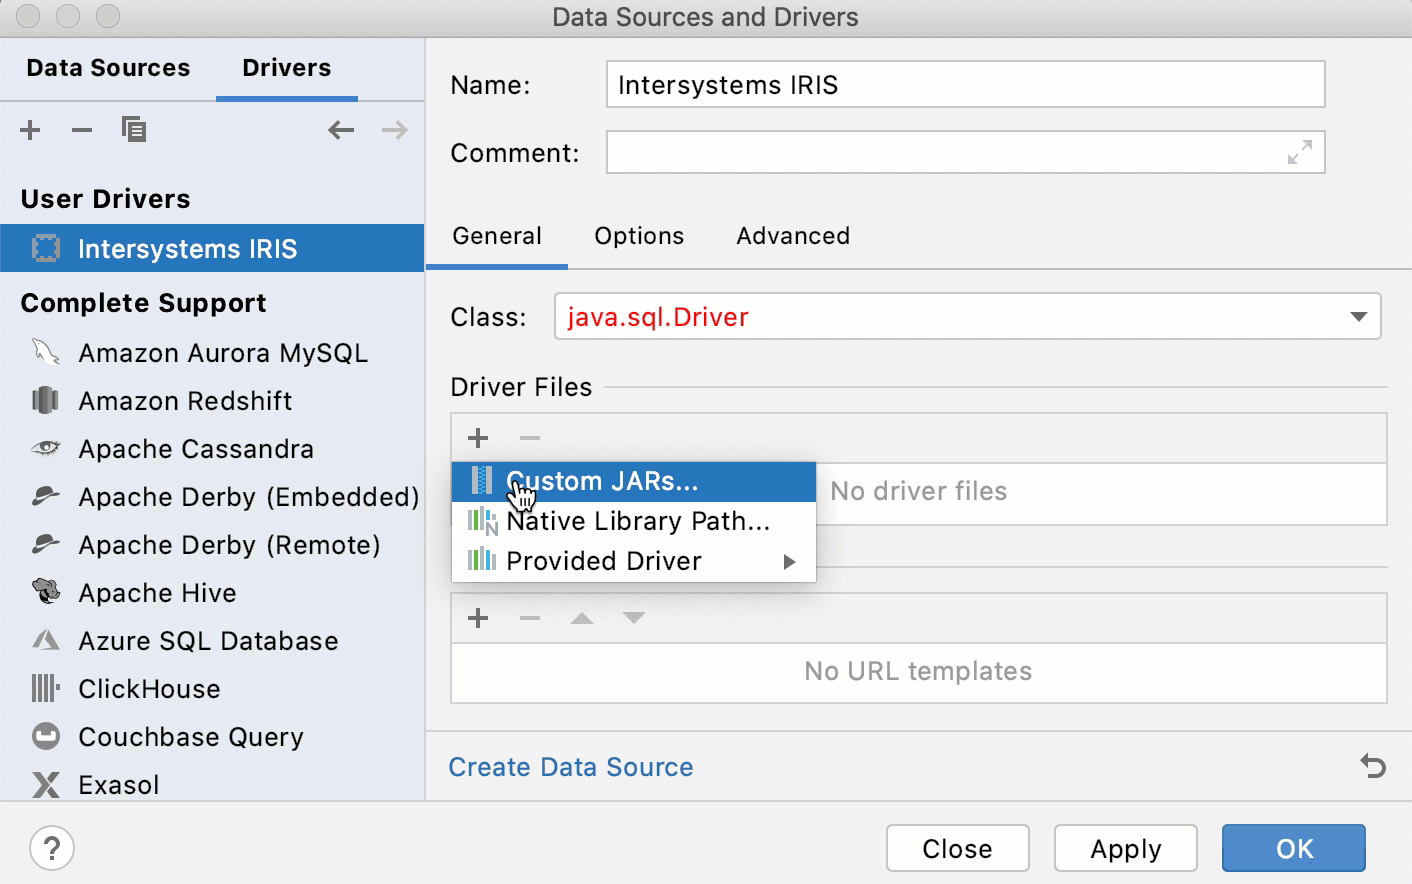 Connect to a database with a user driver